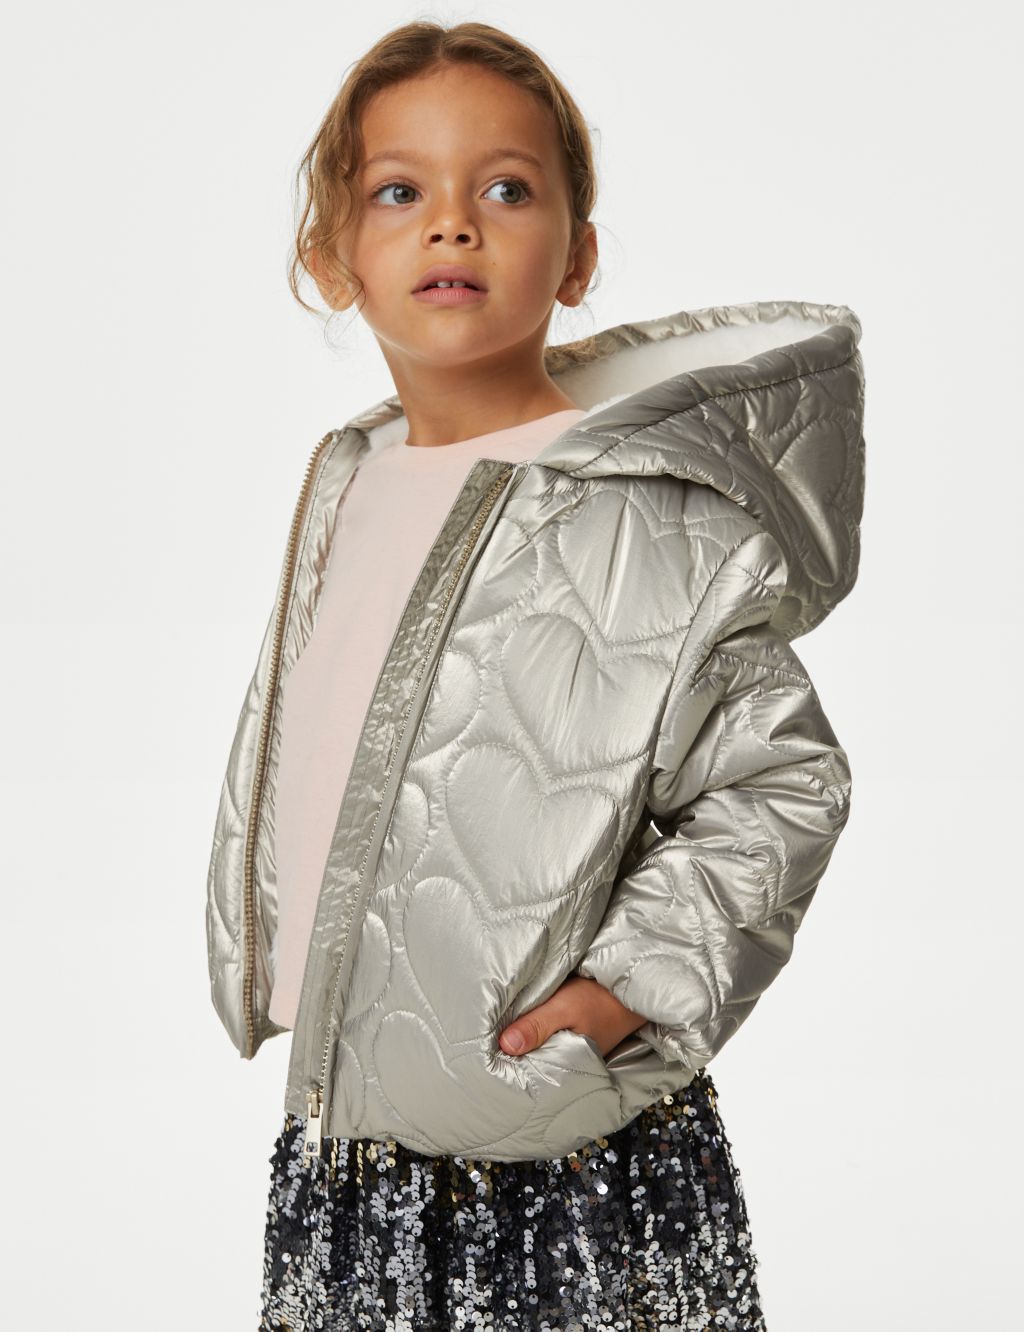 Metallic Heart Quilted Hooded Padded Jacket (2-8 Yrs) image 1